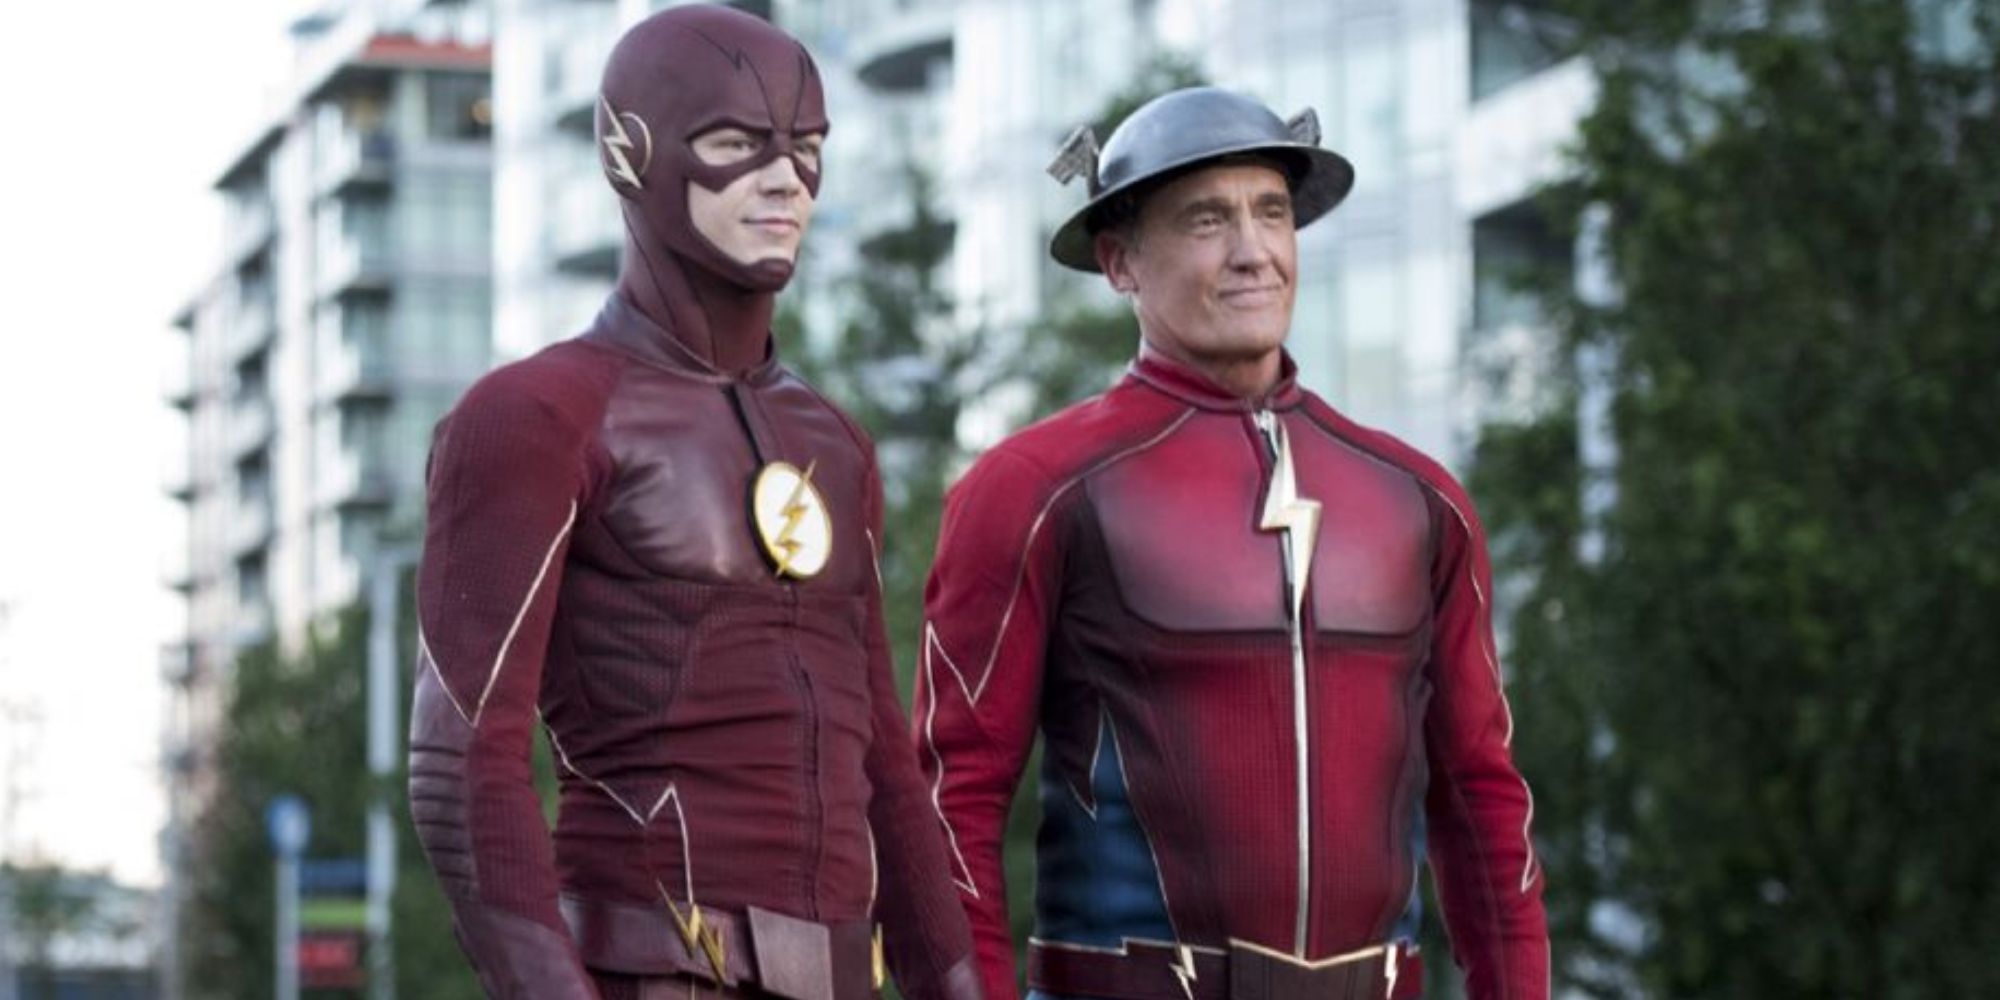 Grant Gustin and John Wesley Shipp as their respective versions of the Flash